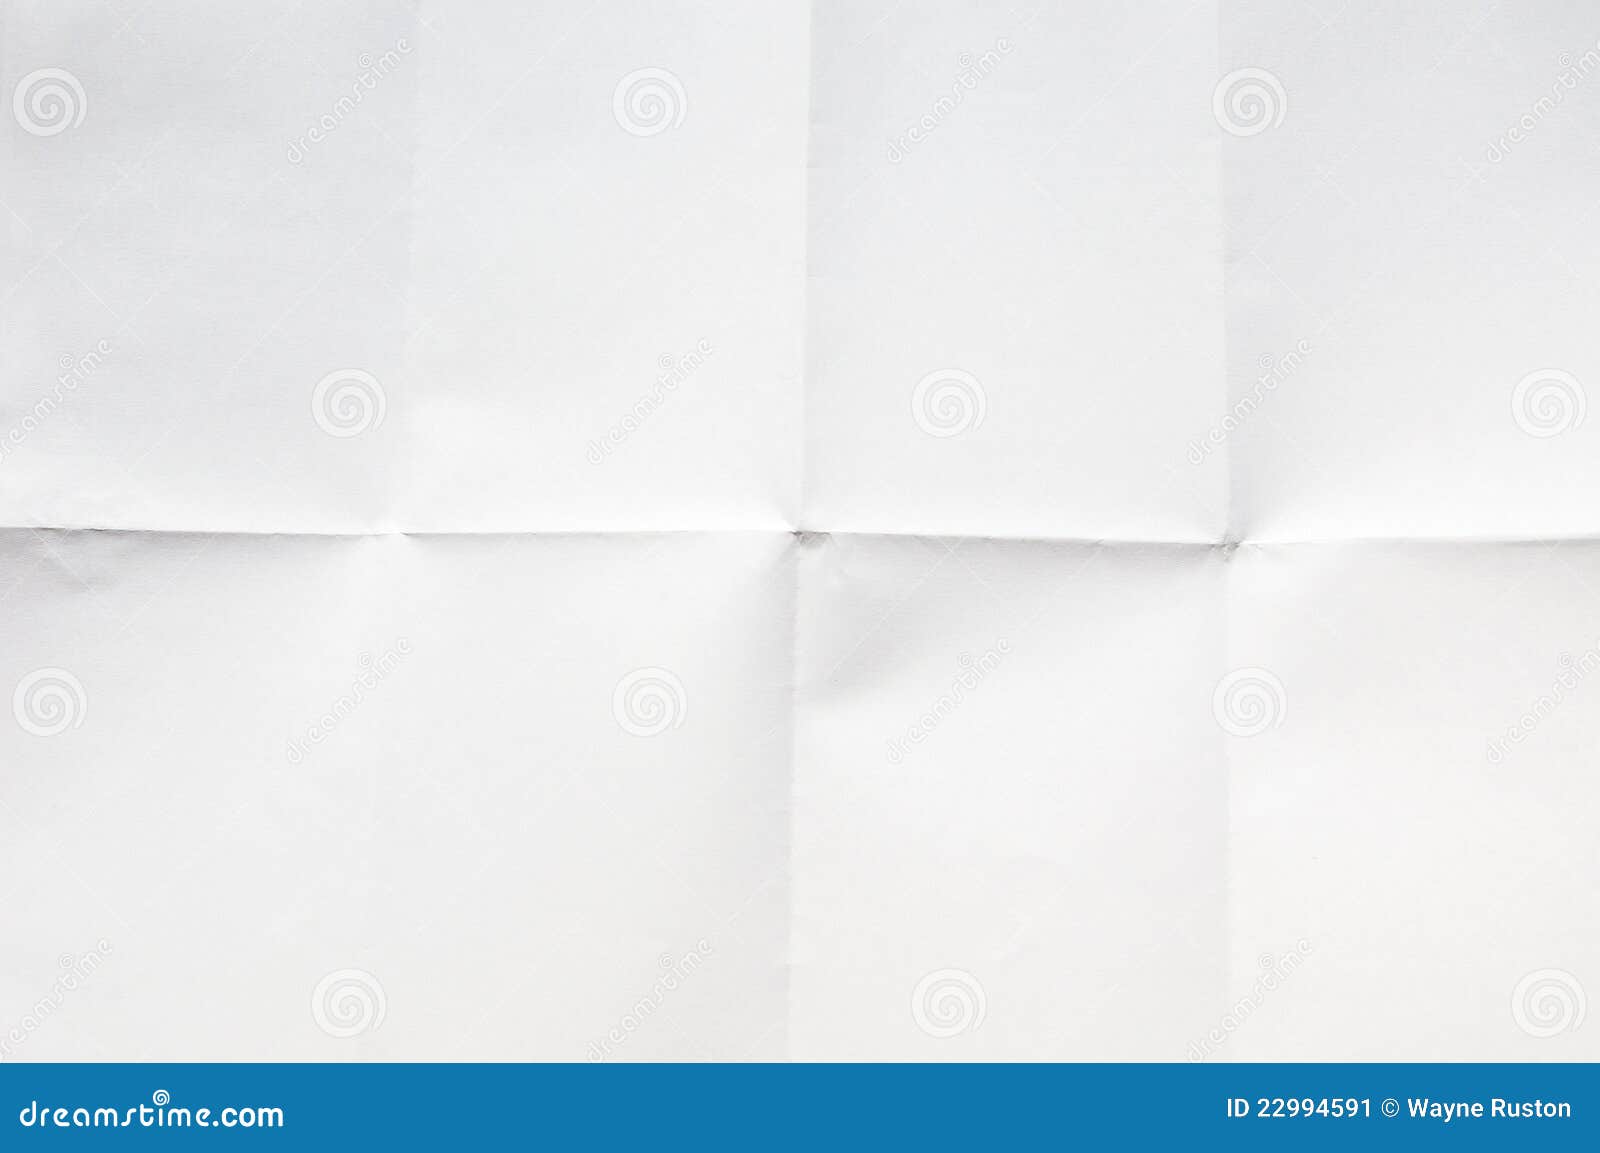 blank unfolded used paper